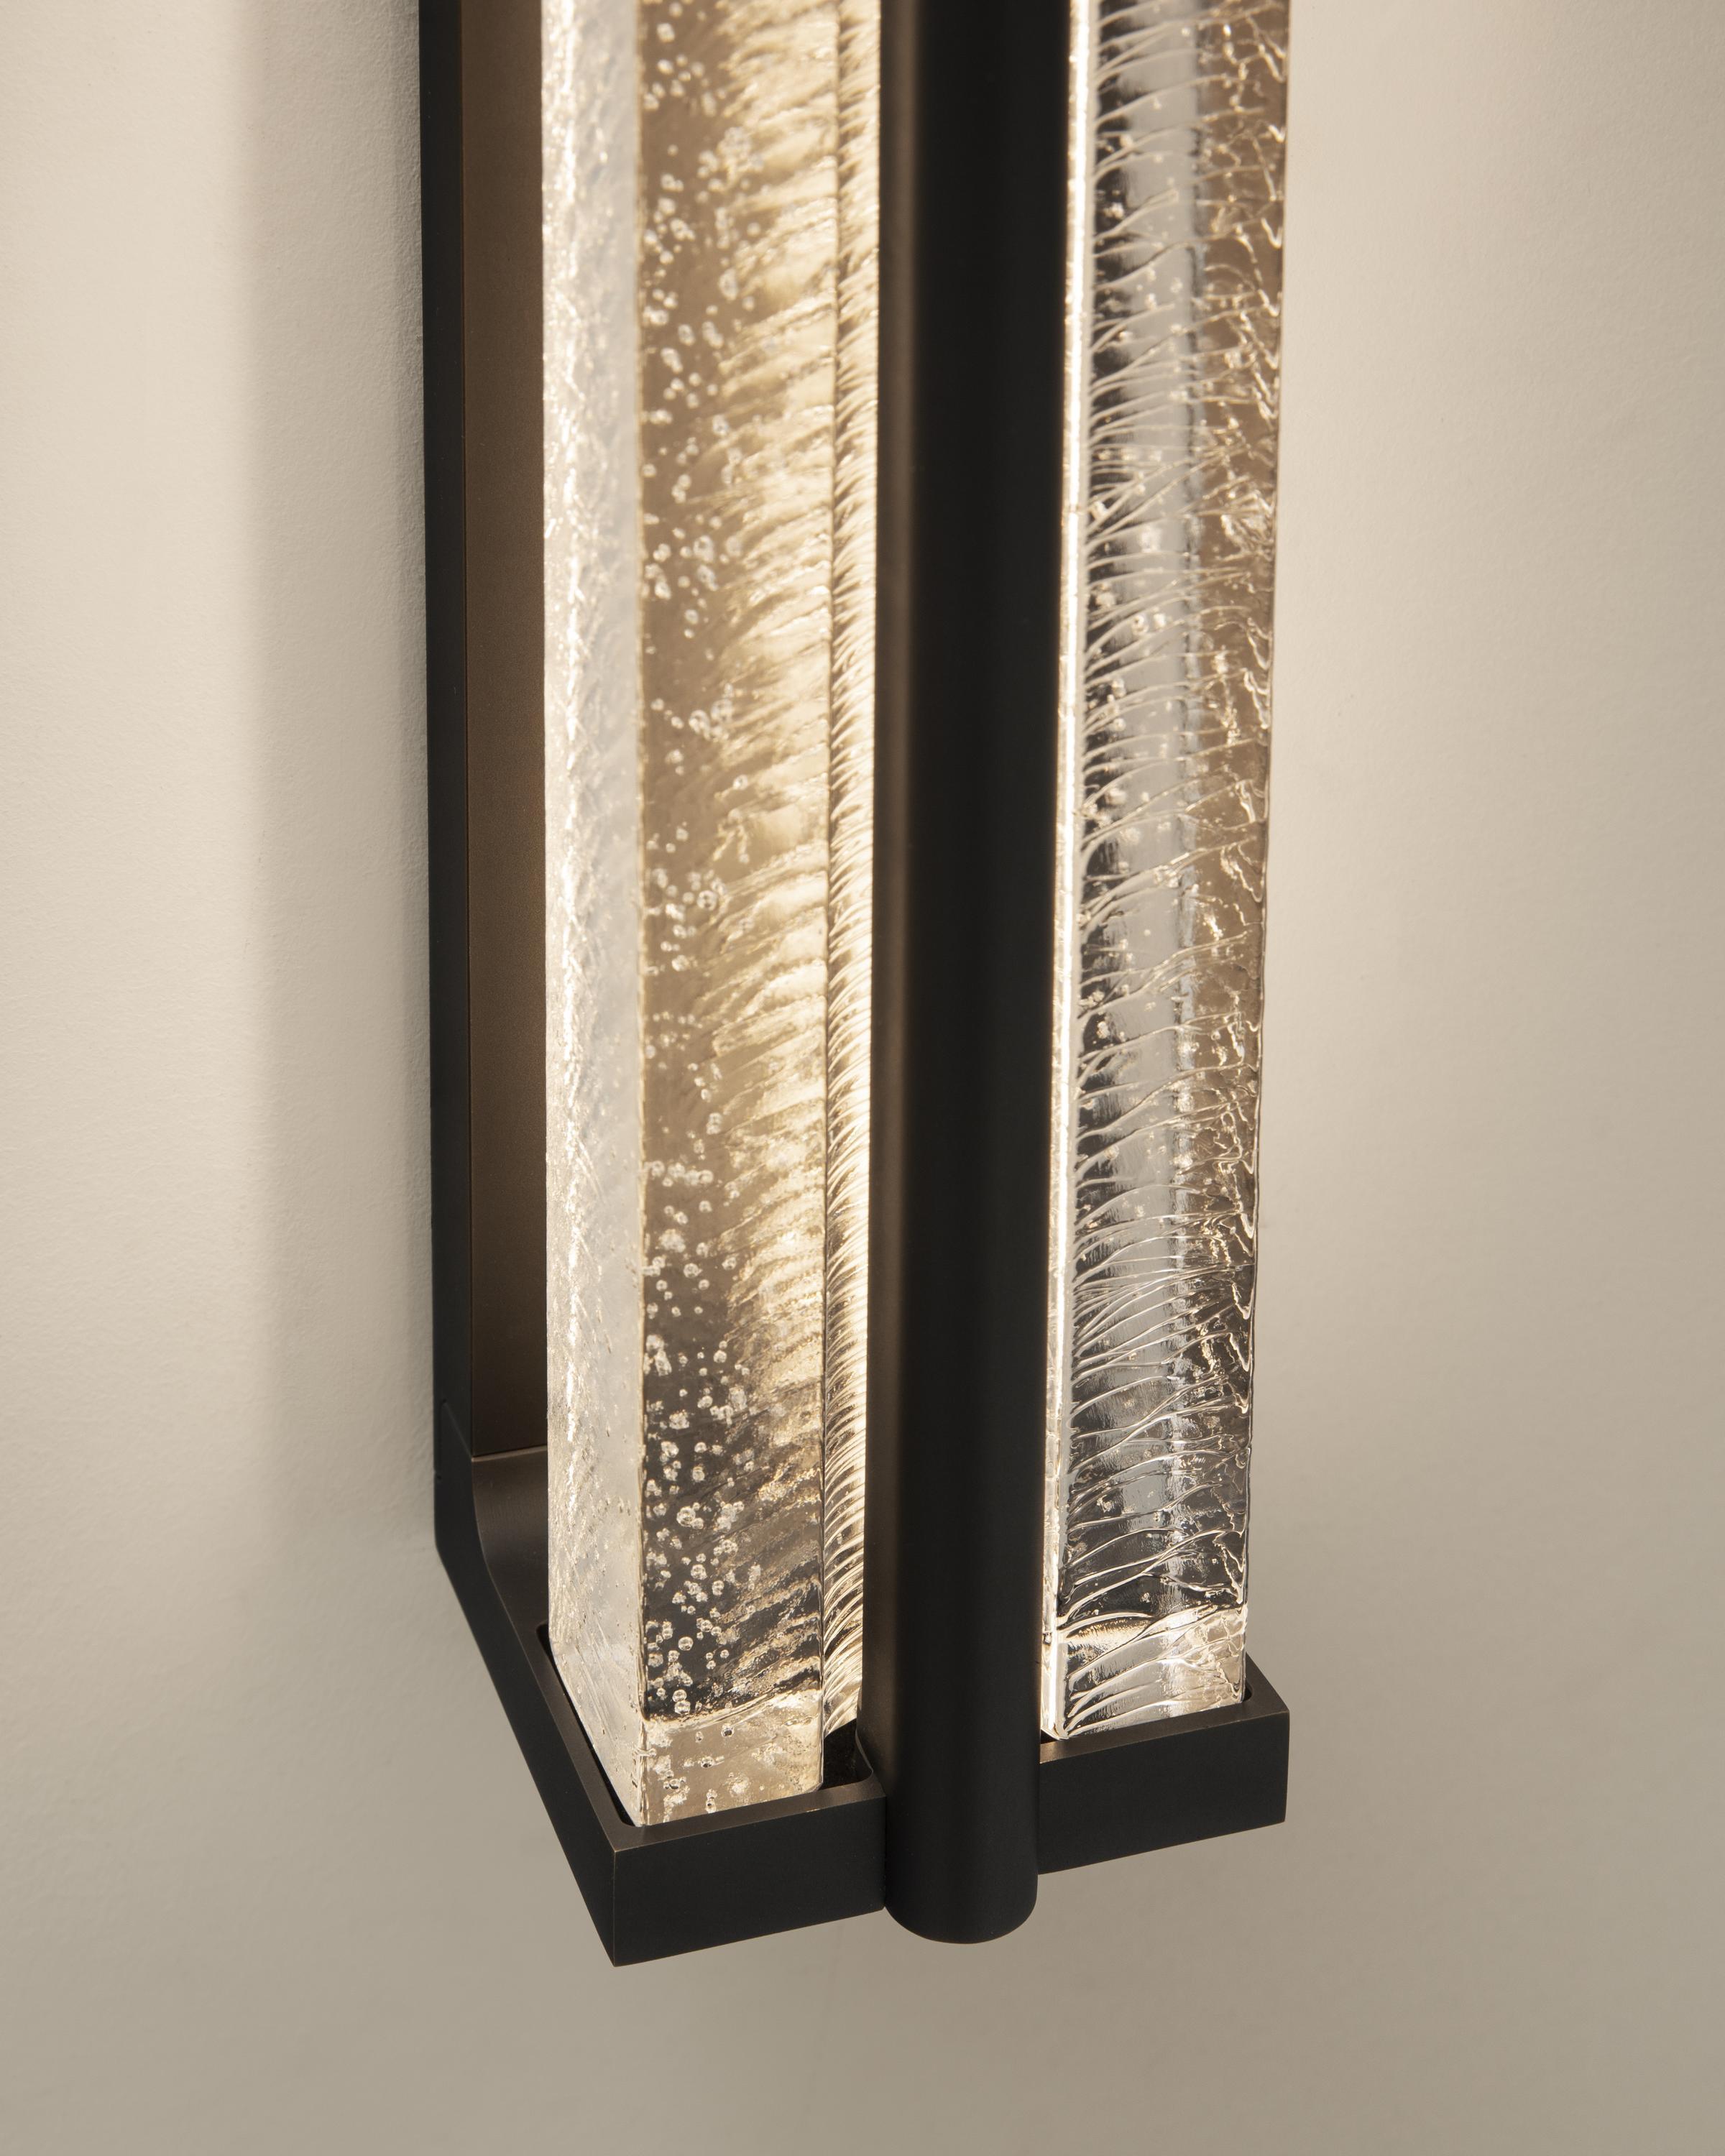 The wonderfully textured cast glass of the Kori Sconce emits a glow reminiscent of dripping icicles at night, inspiring its name which means “ice” in Japanese. These textures are complemented by a minimalist brass frame designed to support the glass